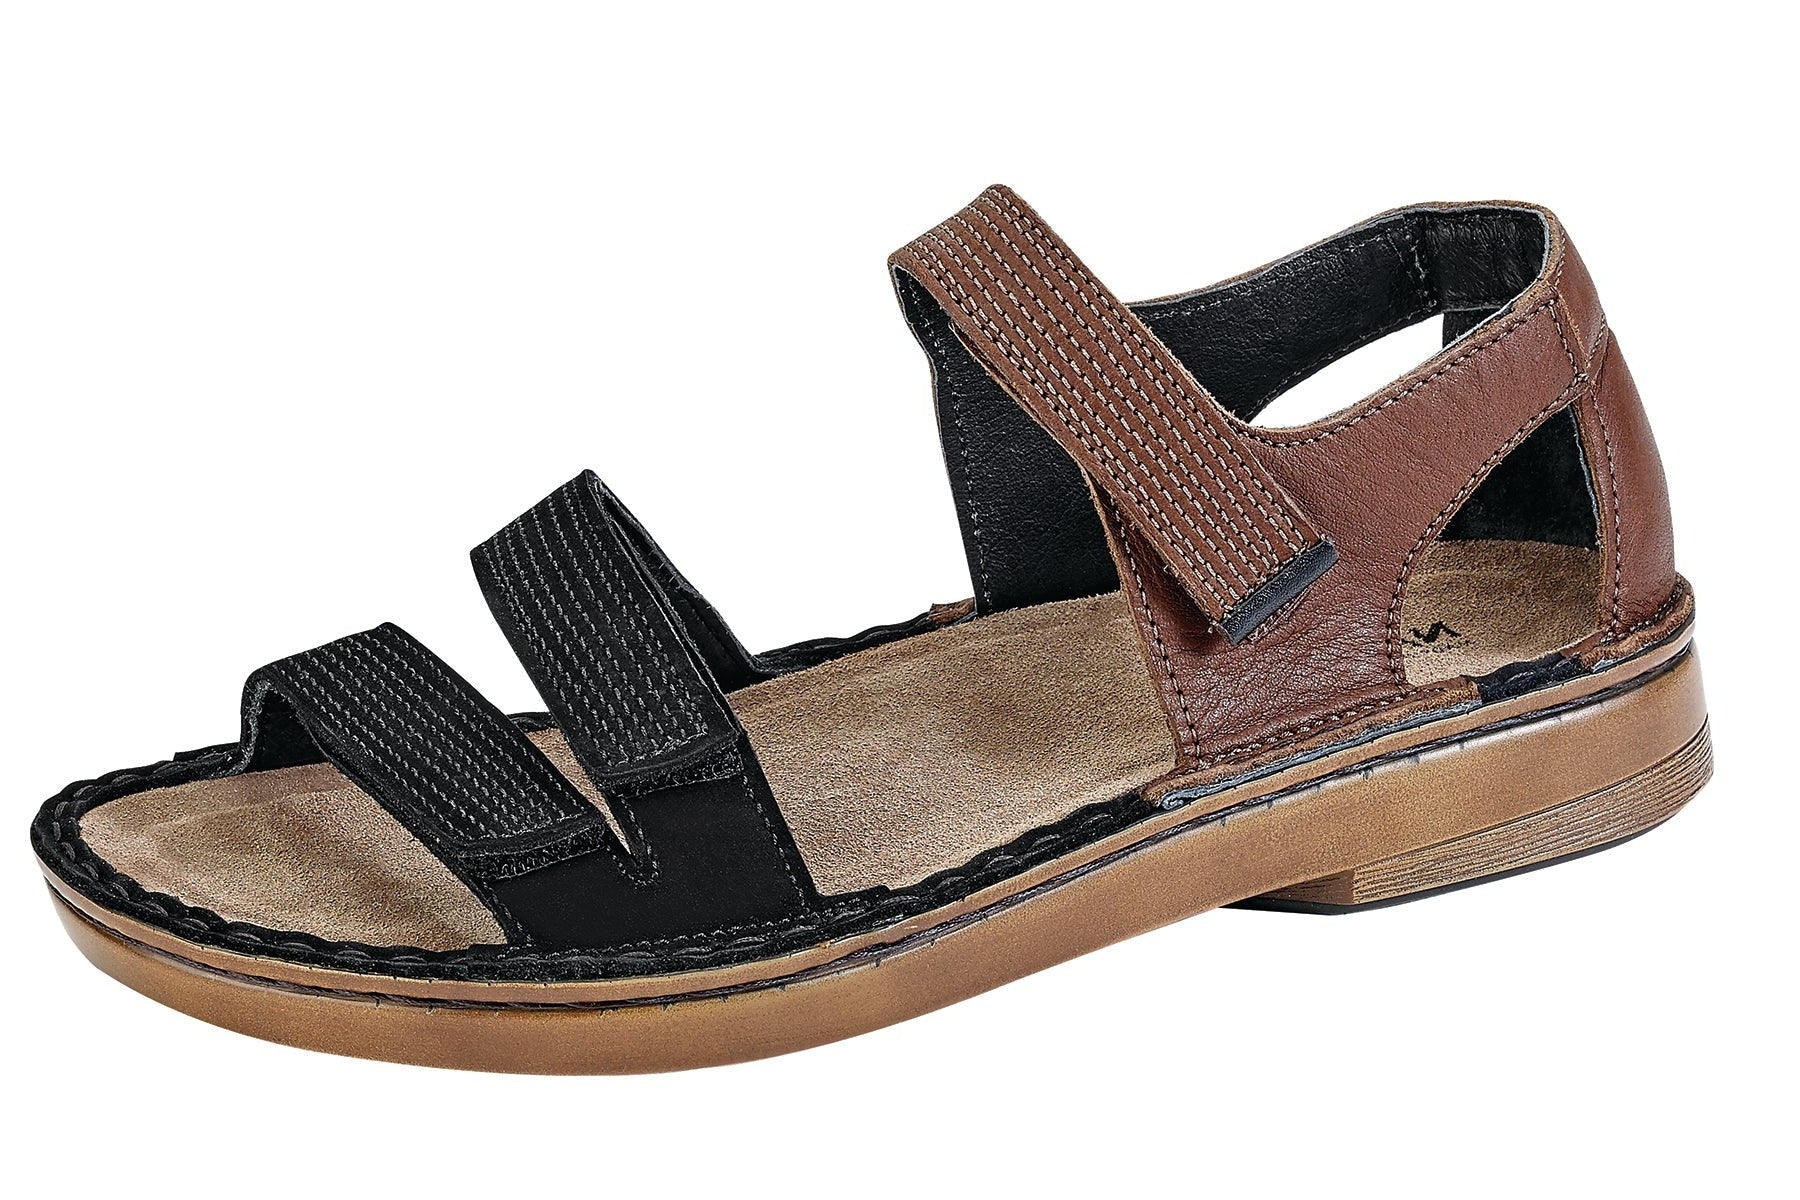 Amarante | Toffee Brown Leather/Black Velvet Nubuck/French Roast leather - Sandals - Naot